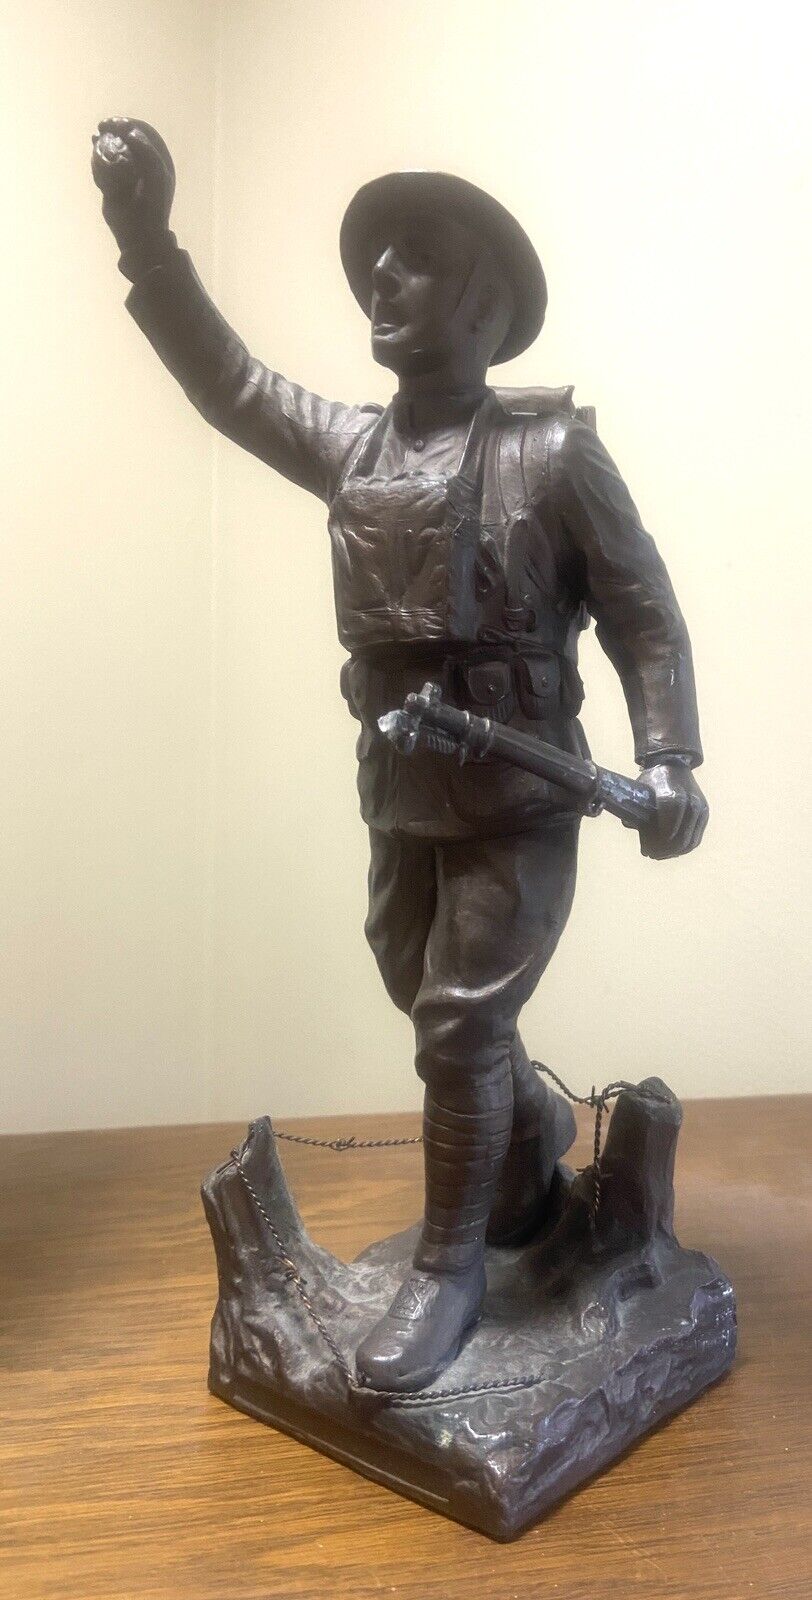 WWI Spirit of the American Doughboy E.M. VIQUESNEY Sculpture 1921-1925